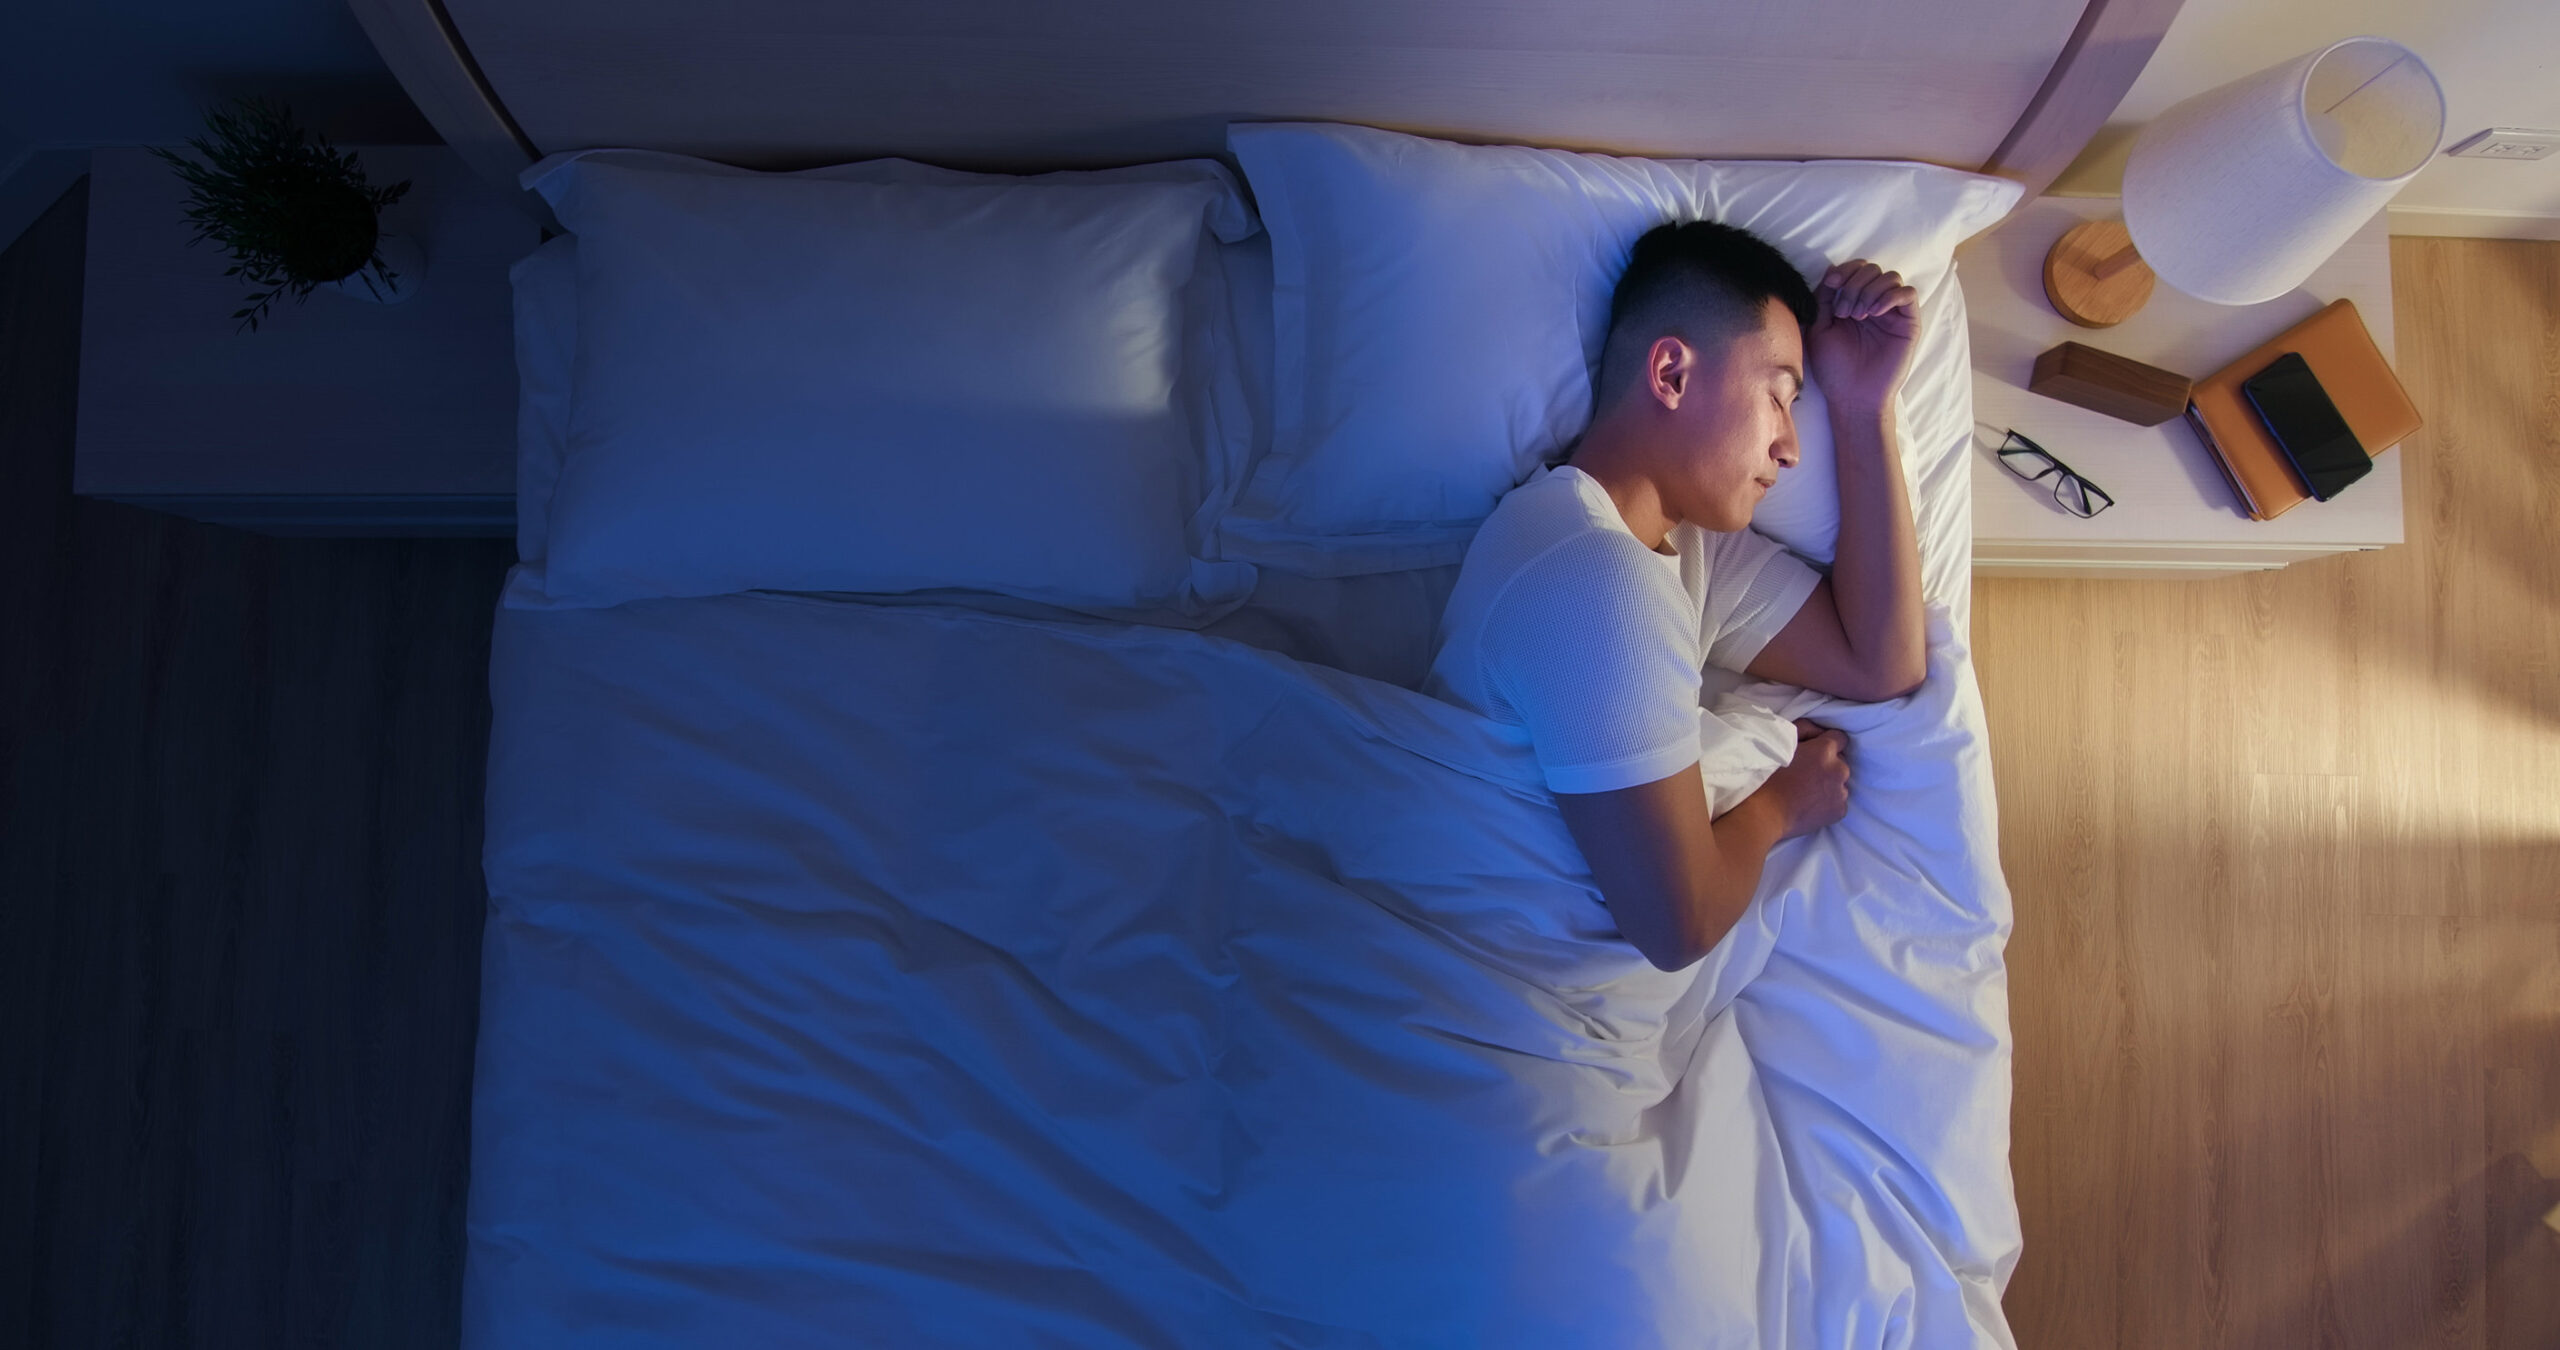 Can Sleep Help You Lose Weight?